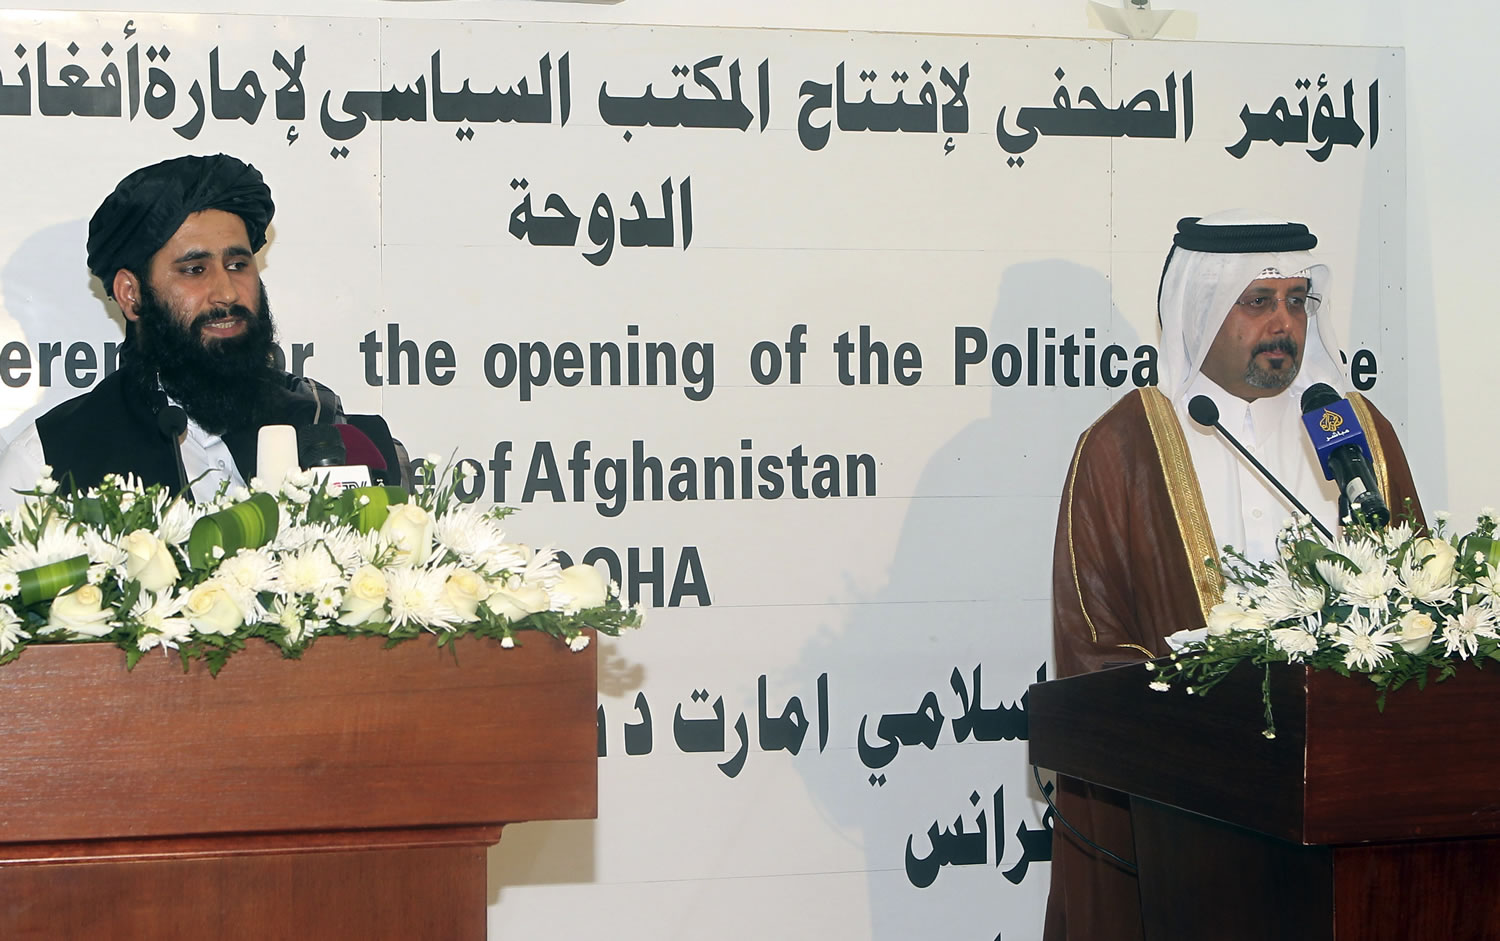 Qatari Assistant Minister for Foreign Affairs Ali bin Fahd al-Hajri, right, and Muhammad Naeem a representative of the Taliban attend a press conference at the official opening of the Taliban office in Doha, Qatar, on Tuesday. In a major breakthrough, the Taliban and the U.S.